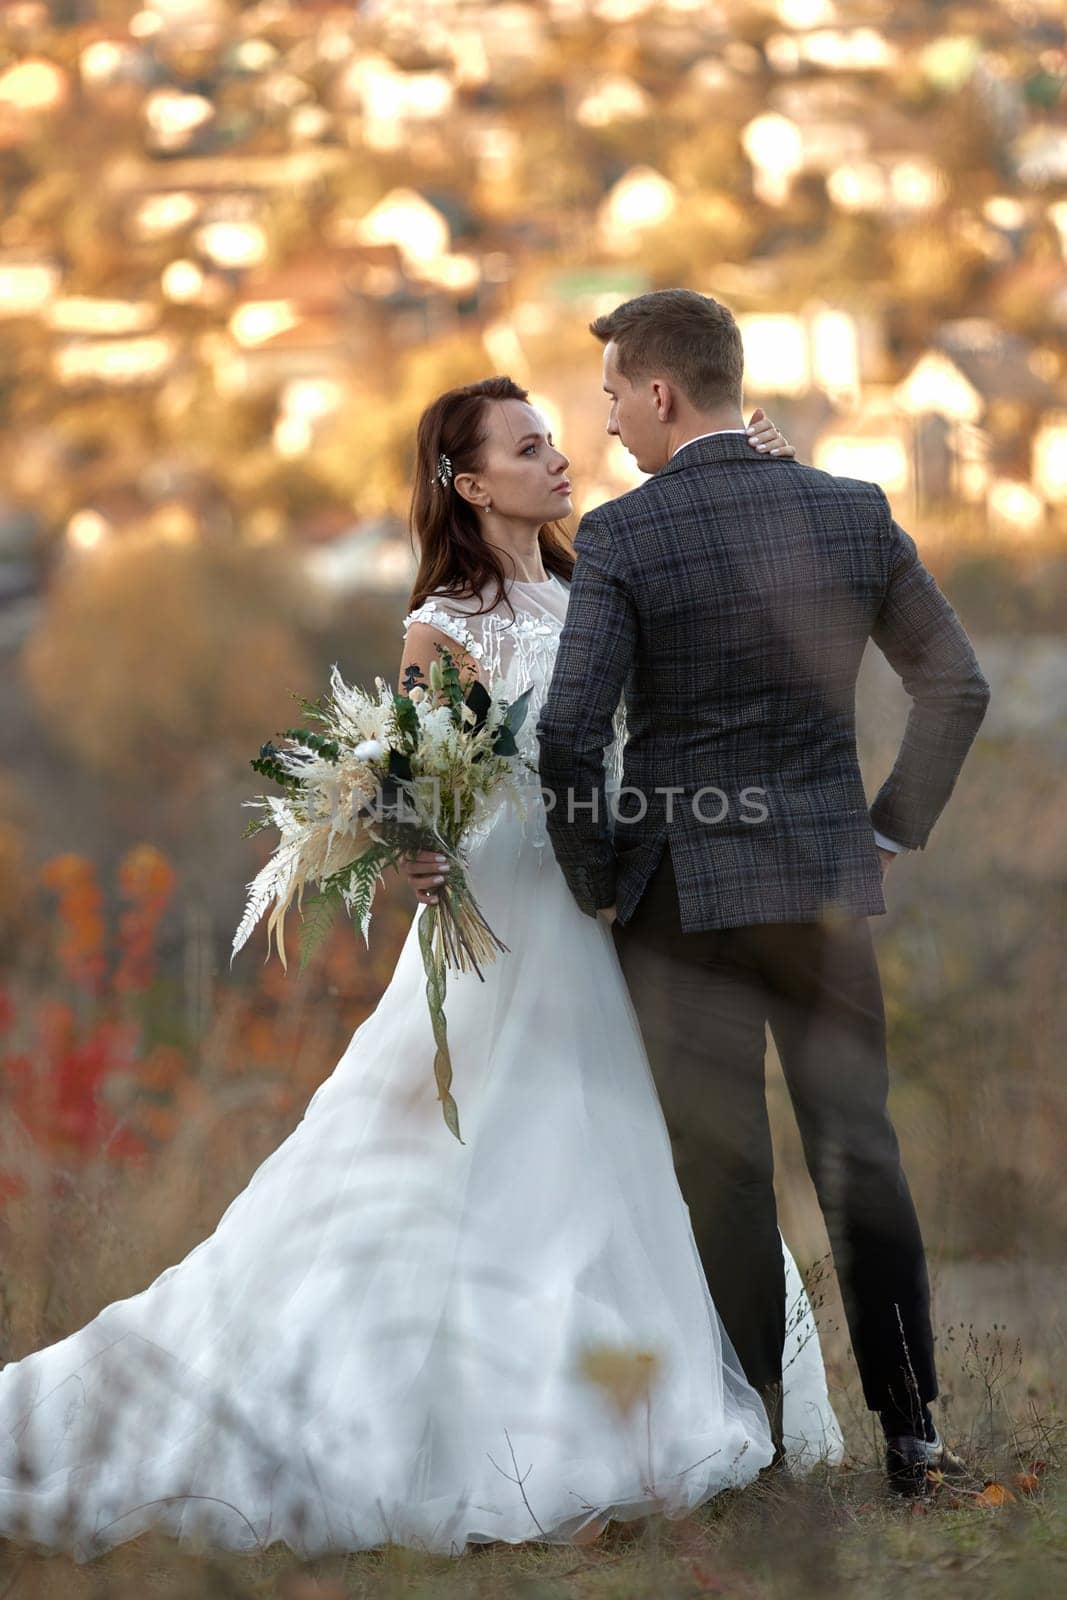 Full length body portrait of bride in white wedding dress and groom standing outdoor on natural background